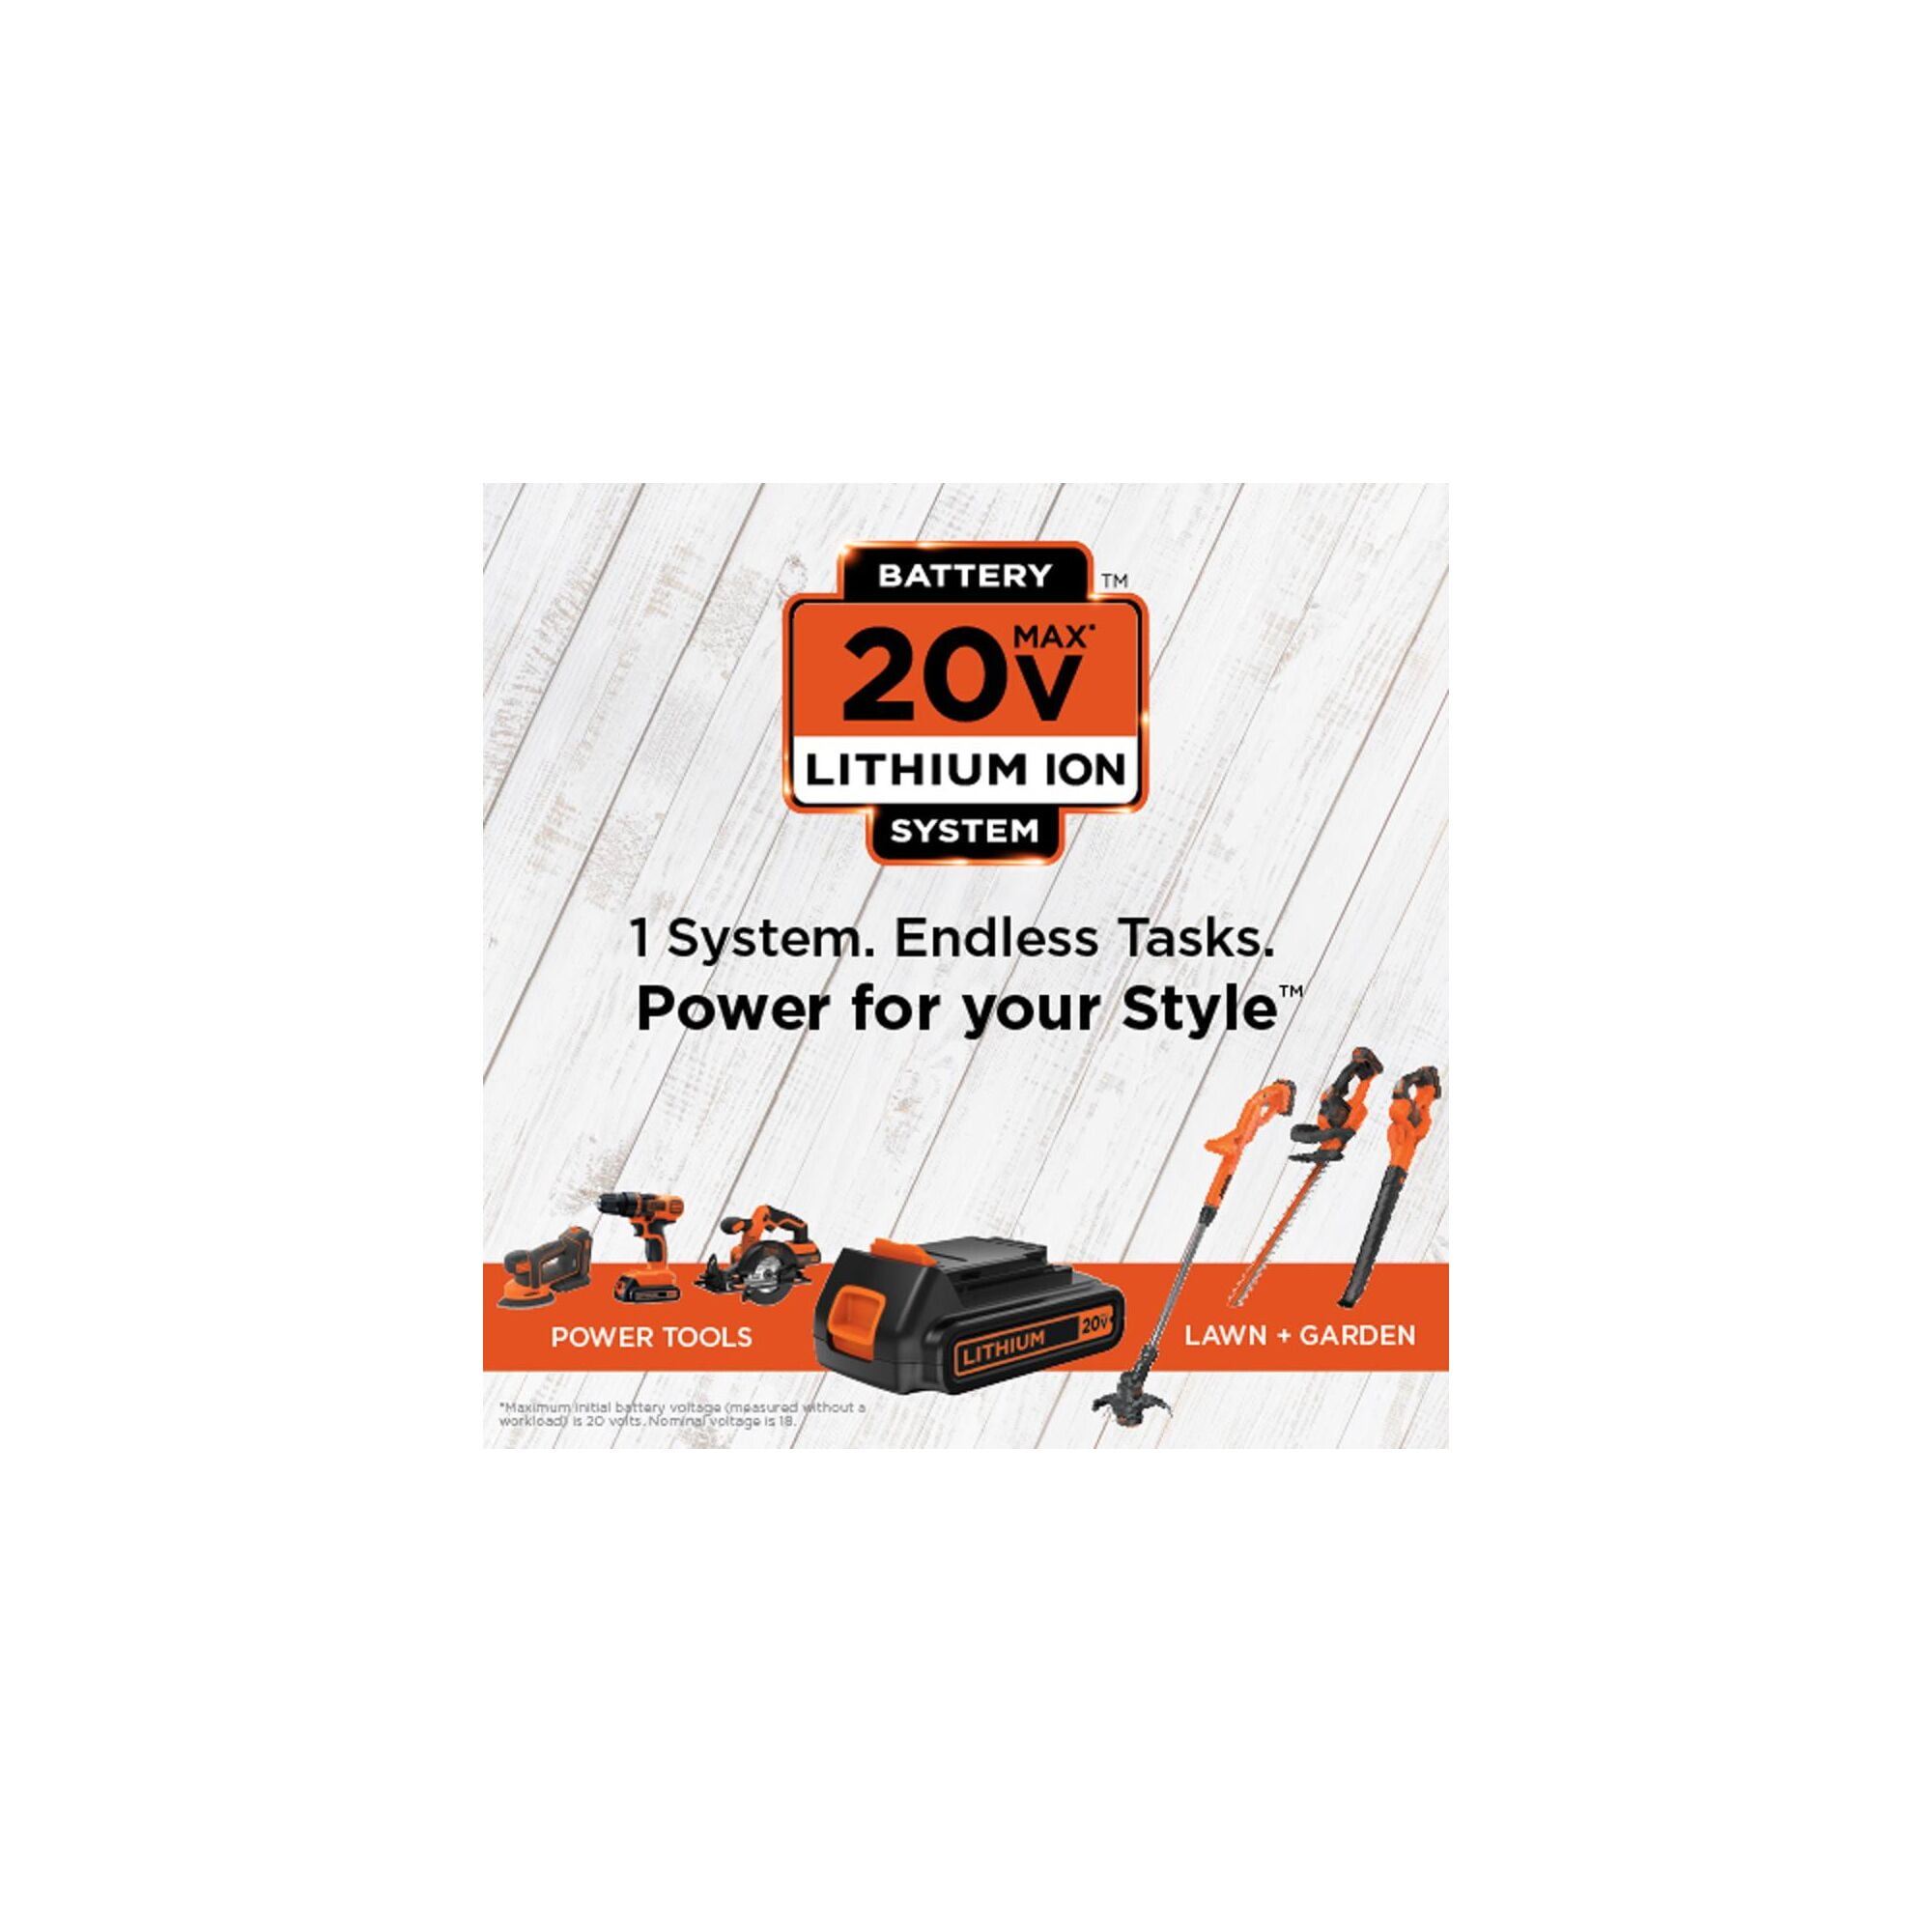 Black and Decker 20V 4 Tool Combo Kit BD4KITCDCRL from Black and Decker -  Acme Tools